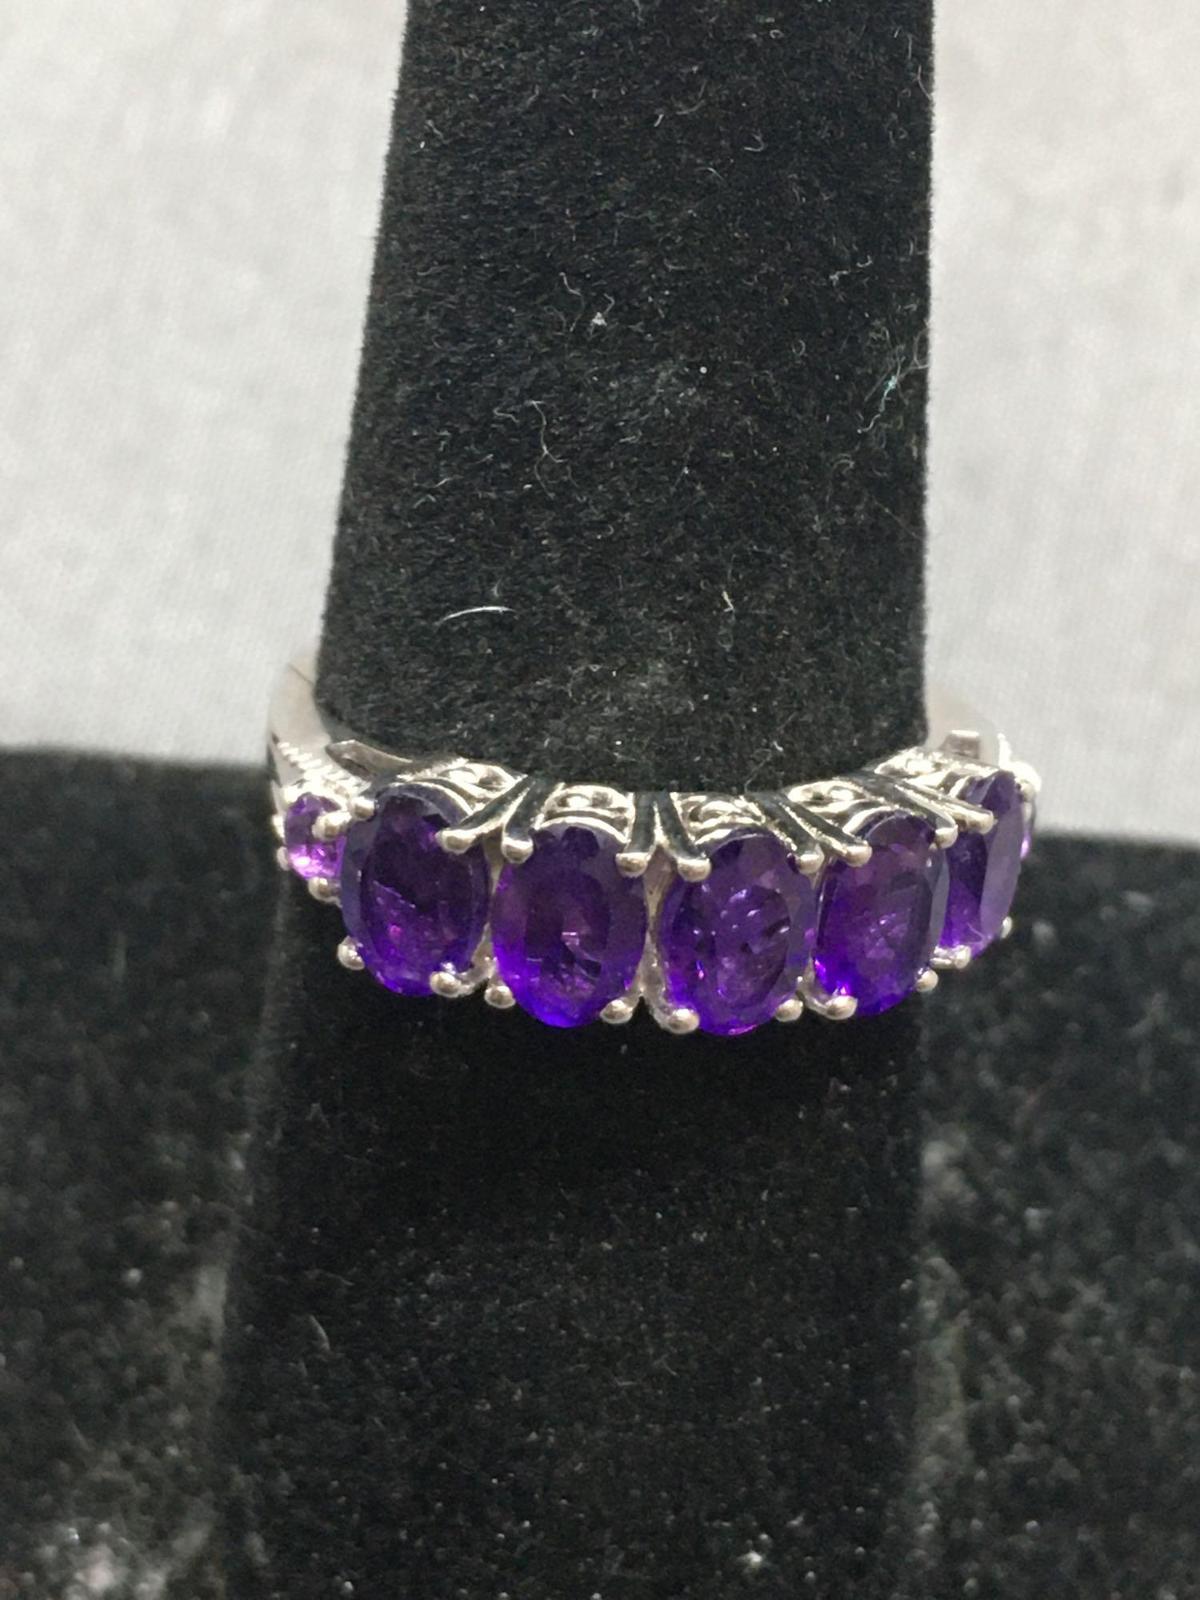 Five Oval Faceted 6x4mm Amethyst Centers w/ Round Sides Sterling Silver Band